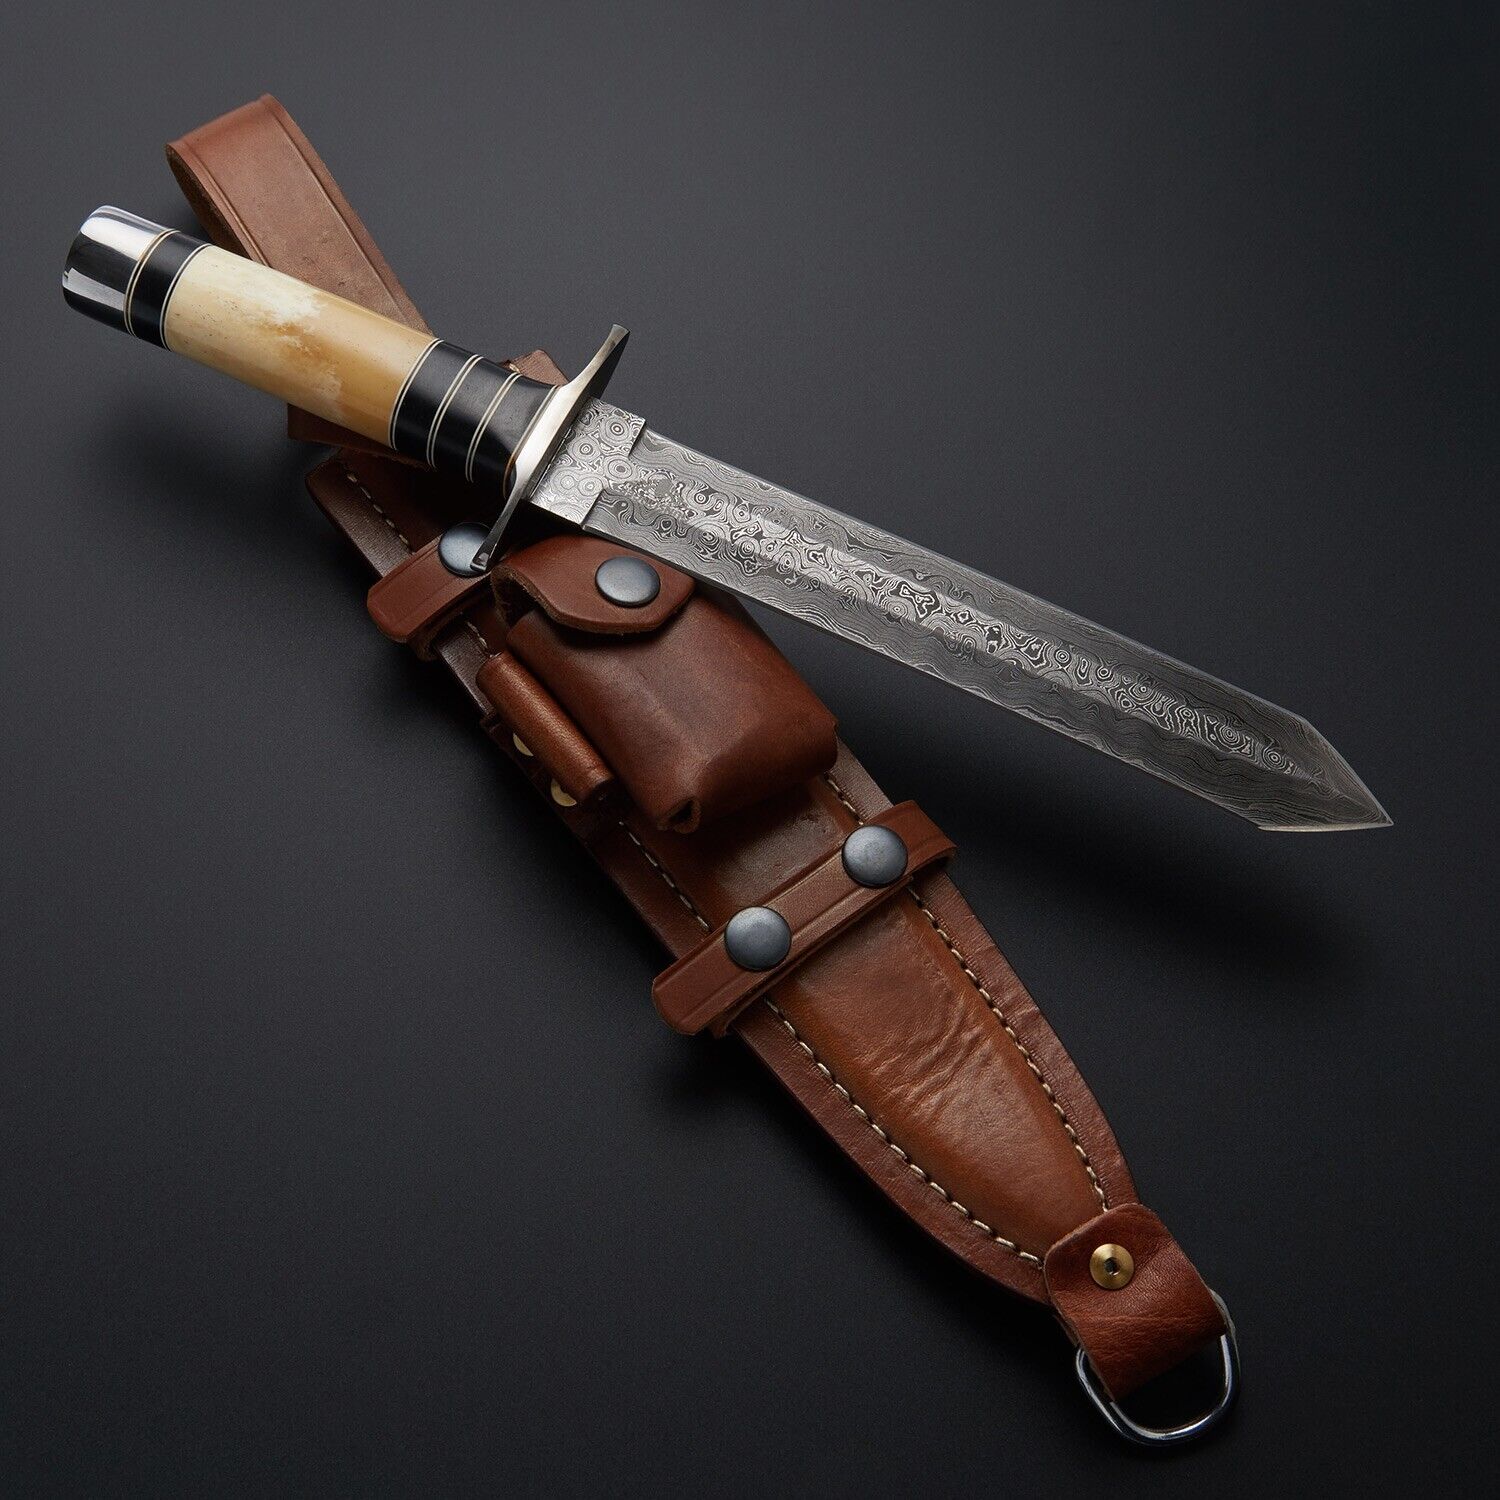 Custom Hand Forged Damascus Steel Hunting Survival Dagger Knife With Sheath